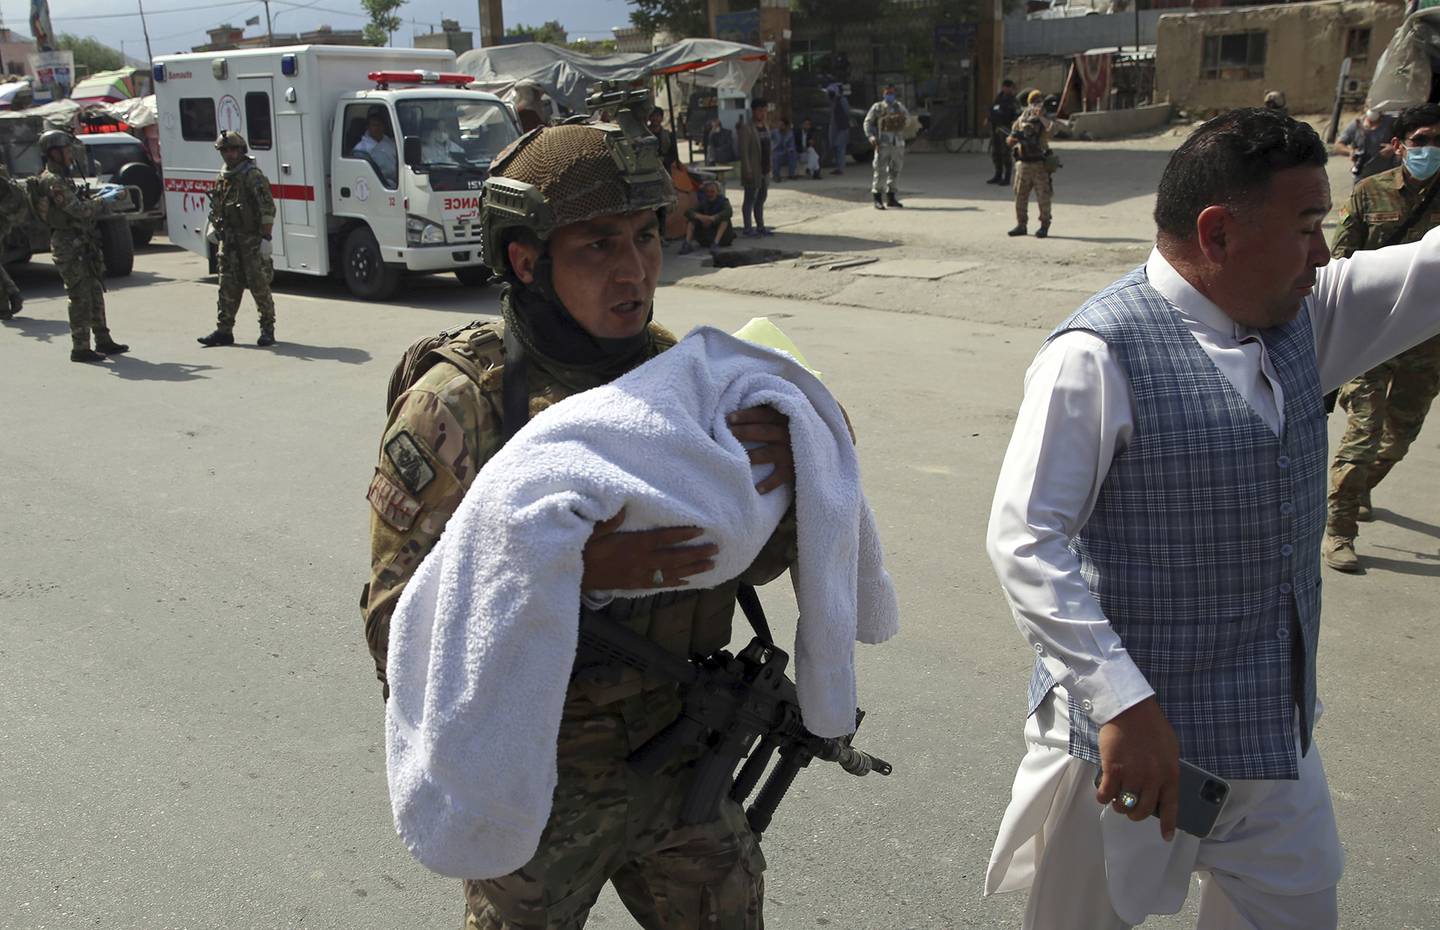 An Afghan security officer carries a baby after gunmen attacked a maternity hospital, in Kabul, Afghanistan, Tuesday, May 12, 2020.